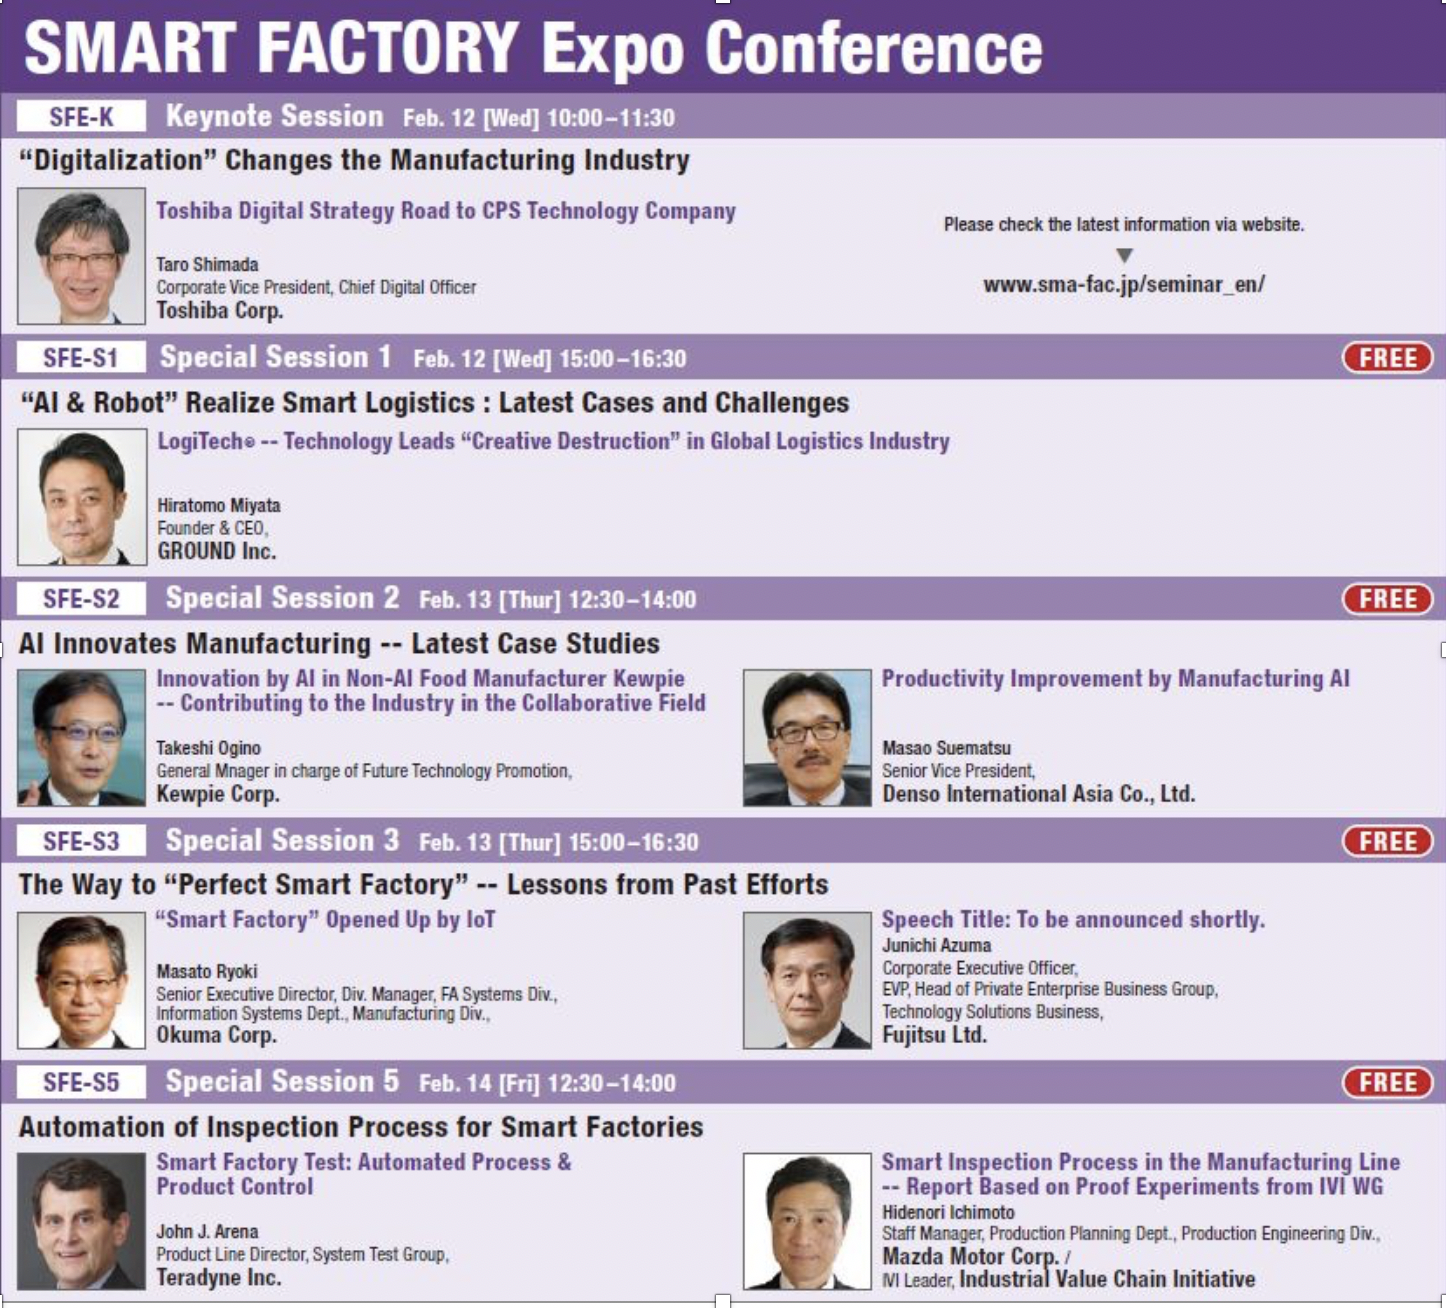 Get your free ticket-Japan's leading large-scale industry event is waiting for you!